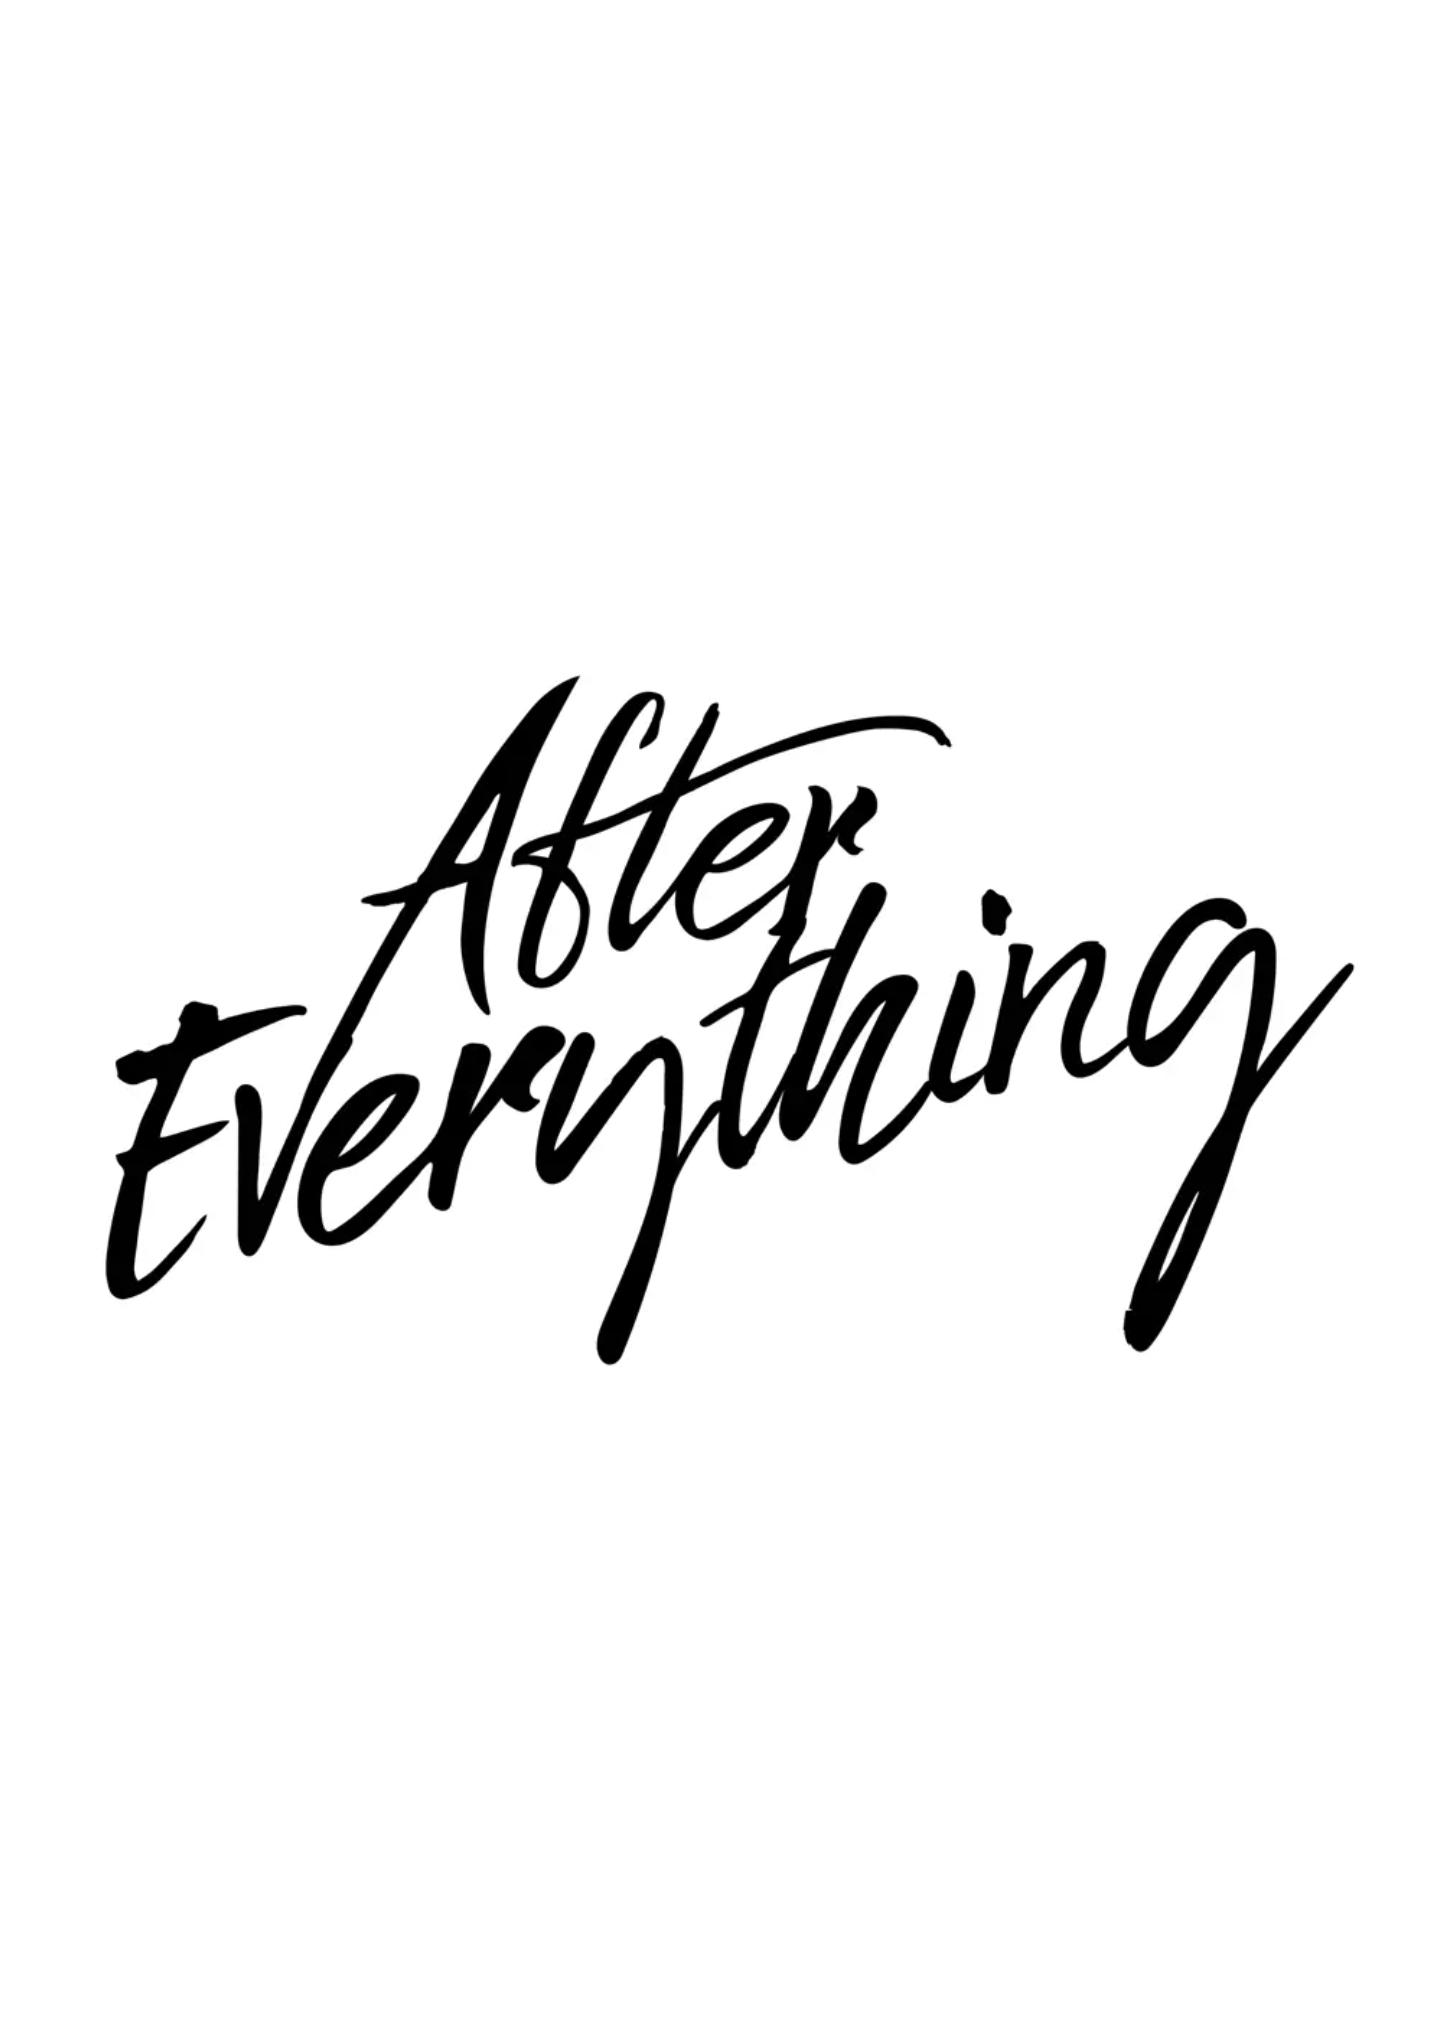 Plakat for 'After everything'